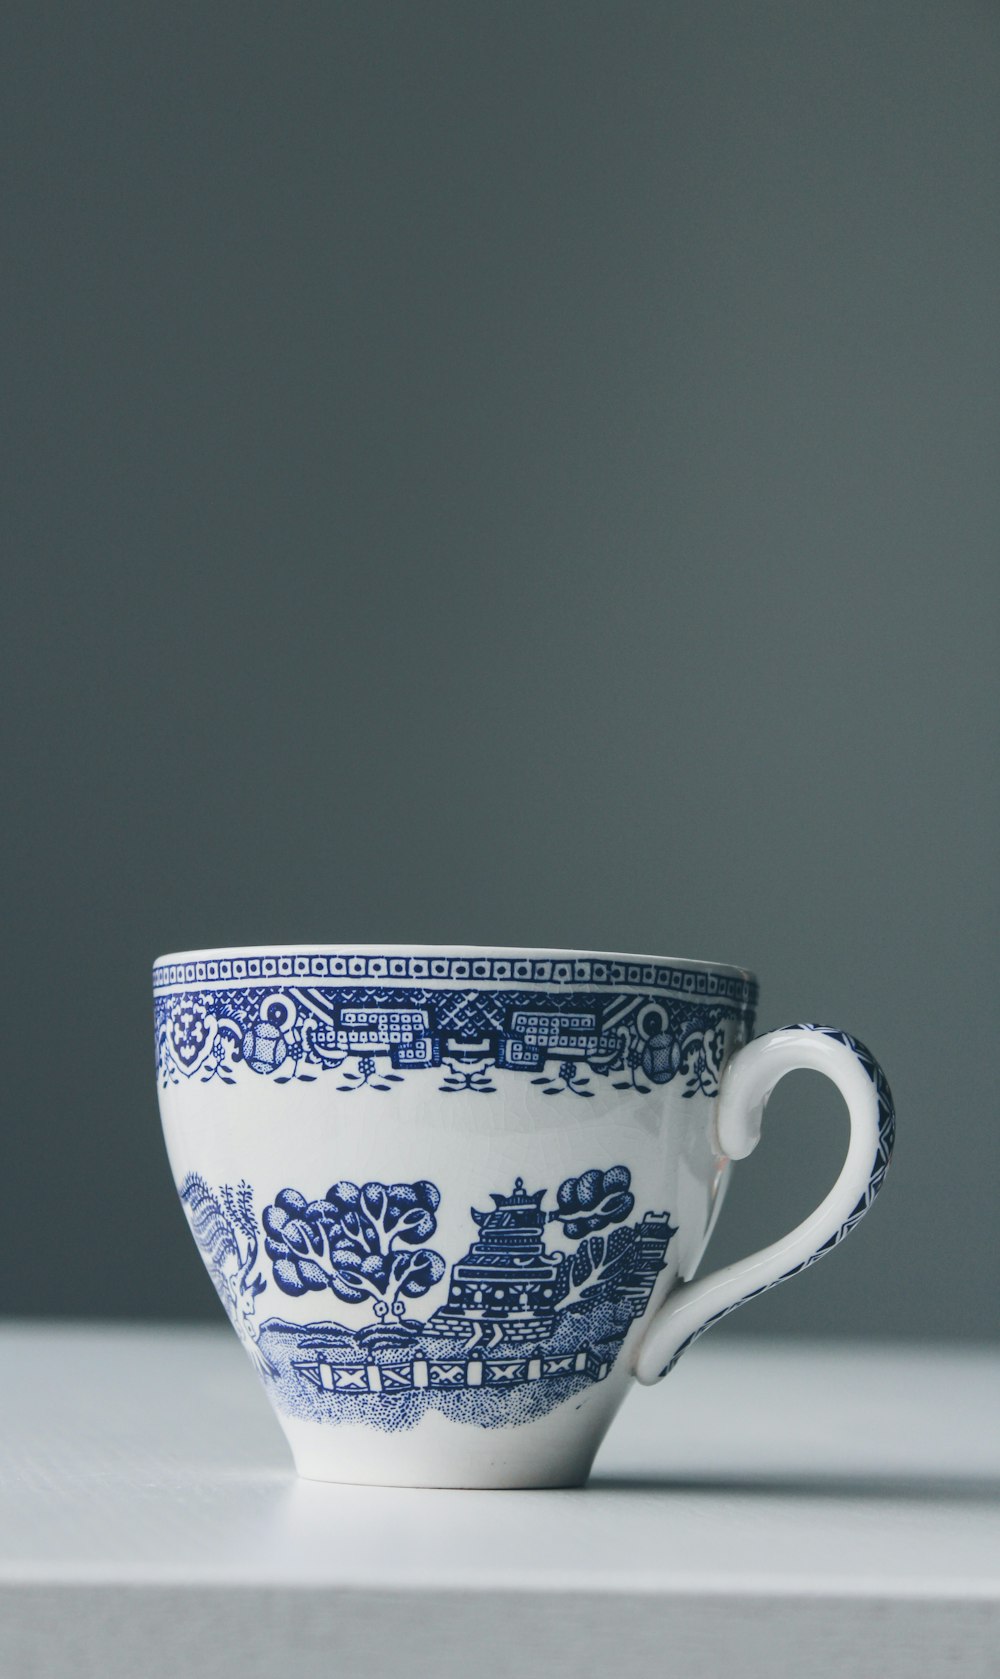 white and blue teacup